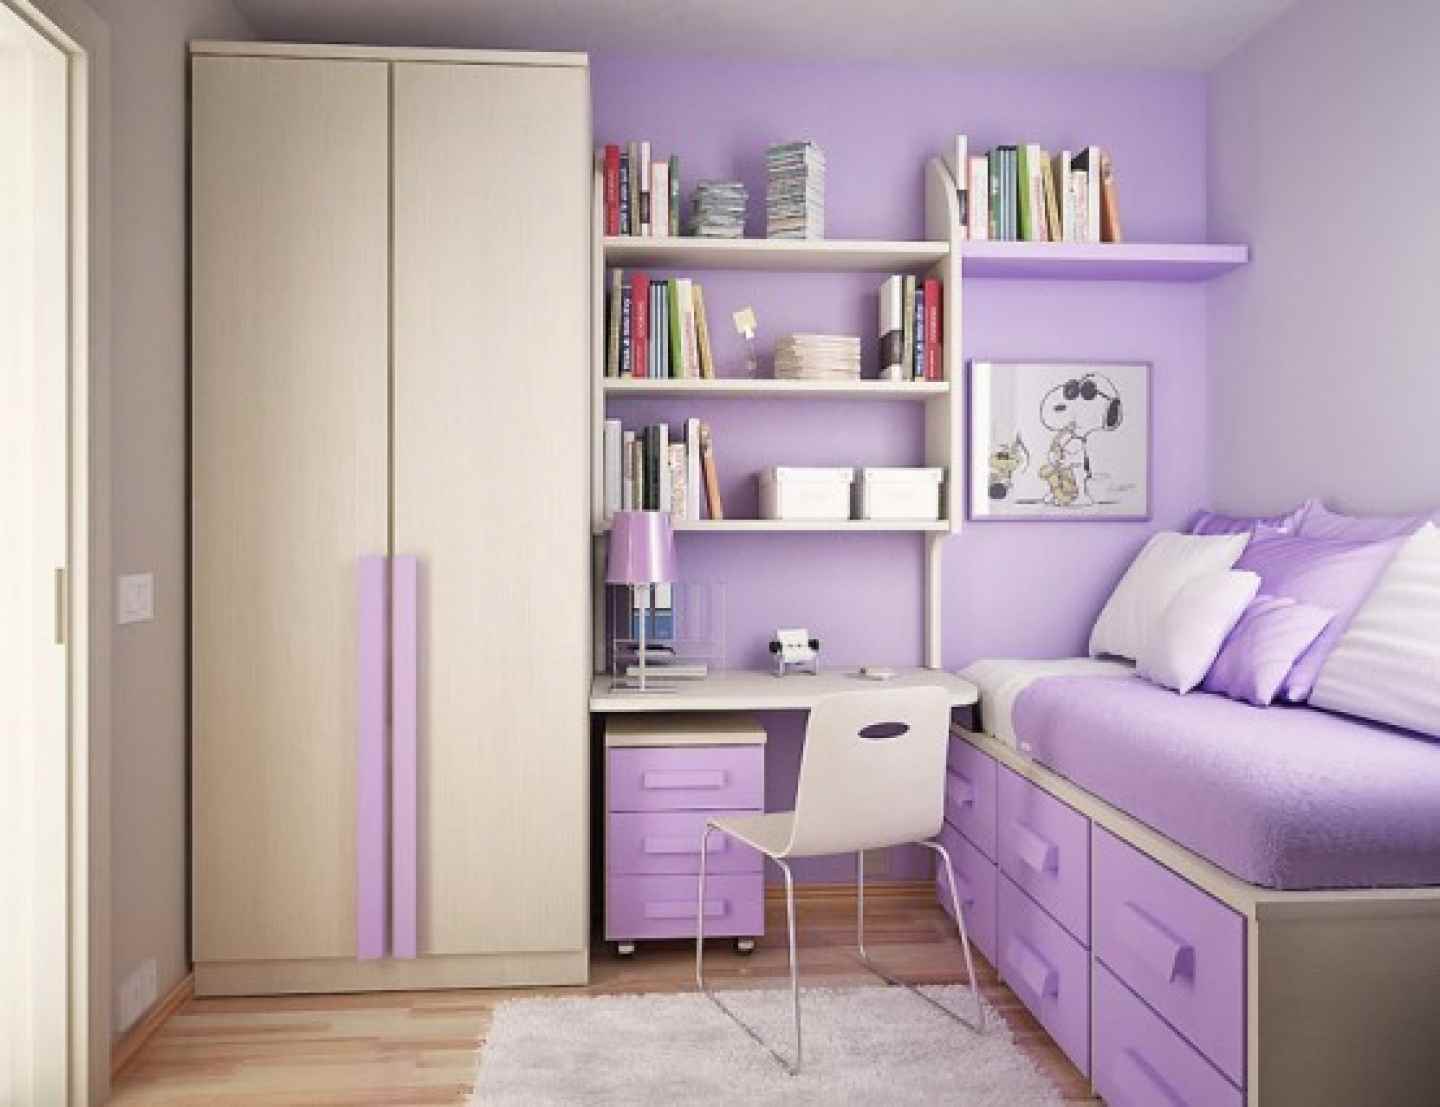 application of a dark lilac color in the interior